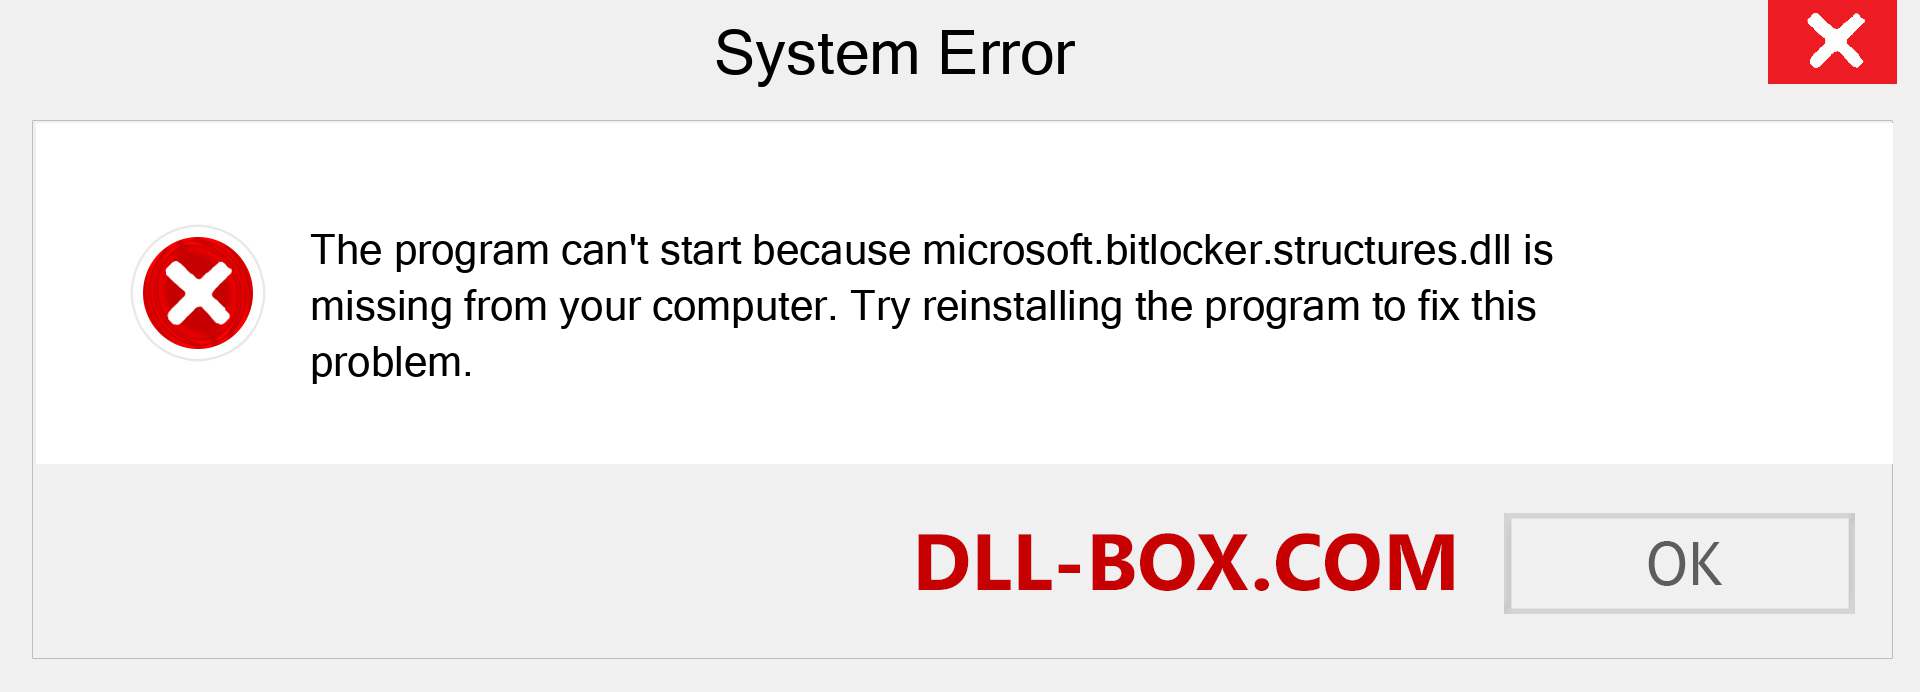  microsoft.bitlocker.structures.dll file is missing?. Download for Windows 7, 8, 10 - Fix  microsoft.bitlocker.structures dll Missing Error on Windows, photos, images